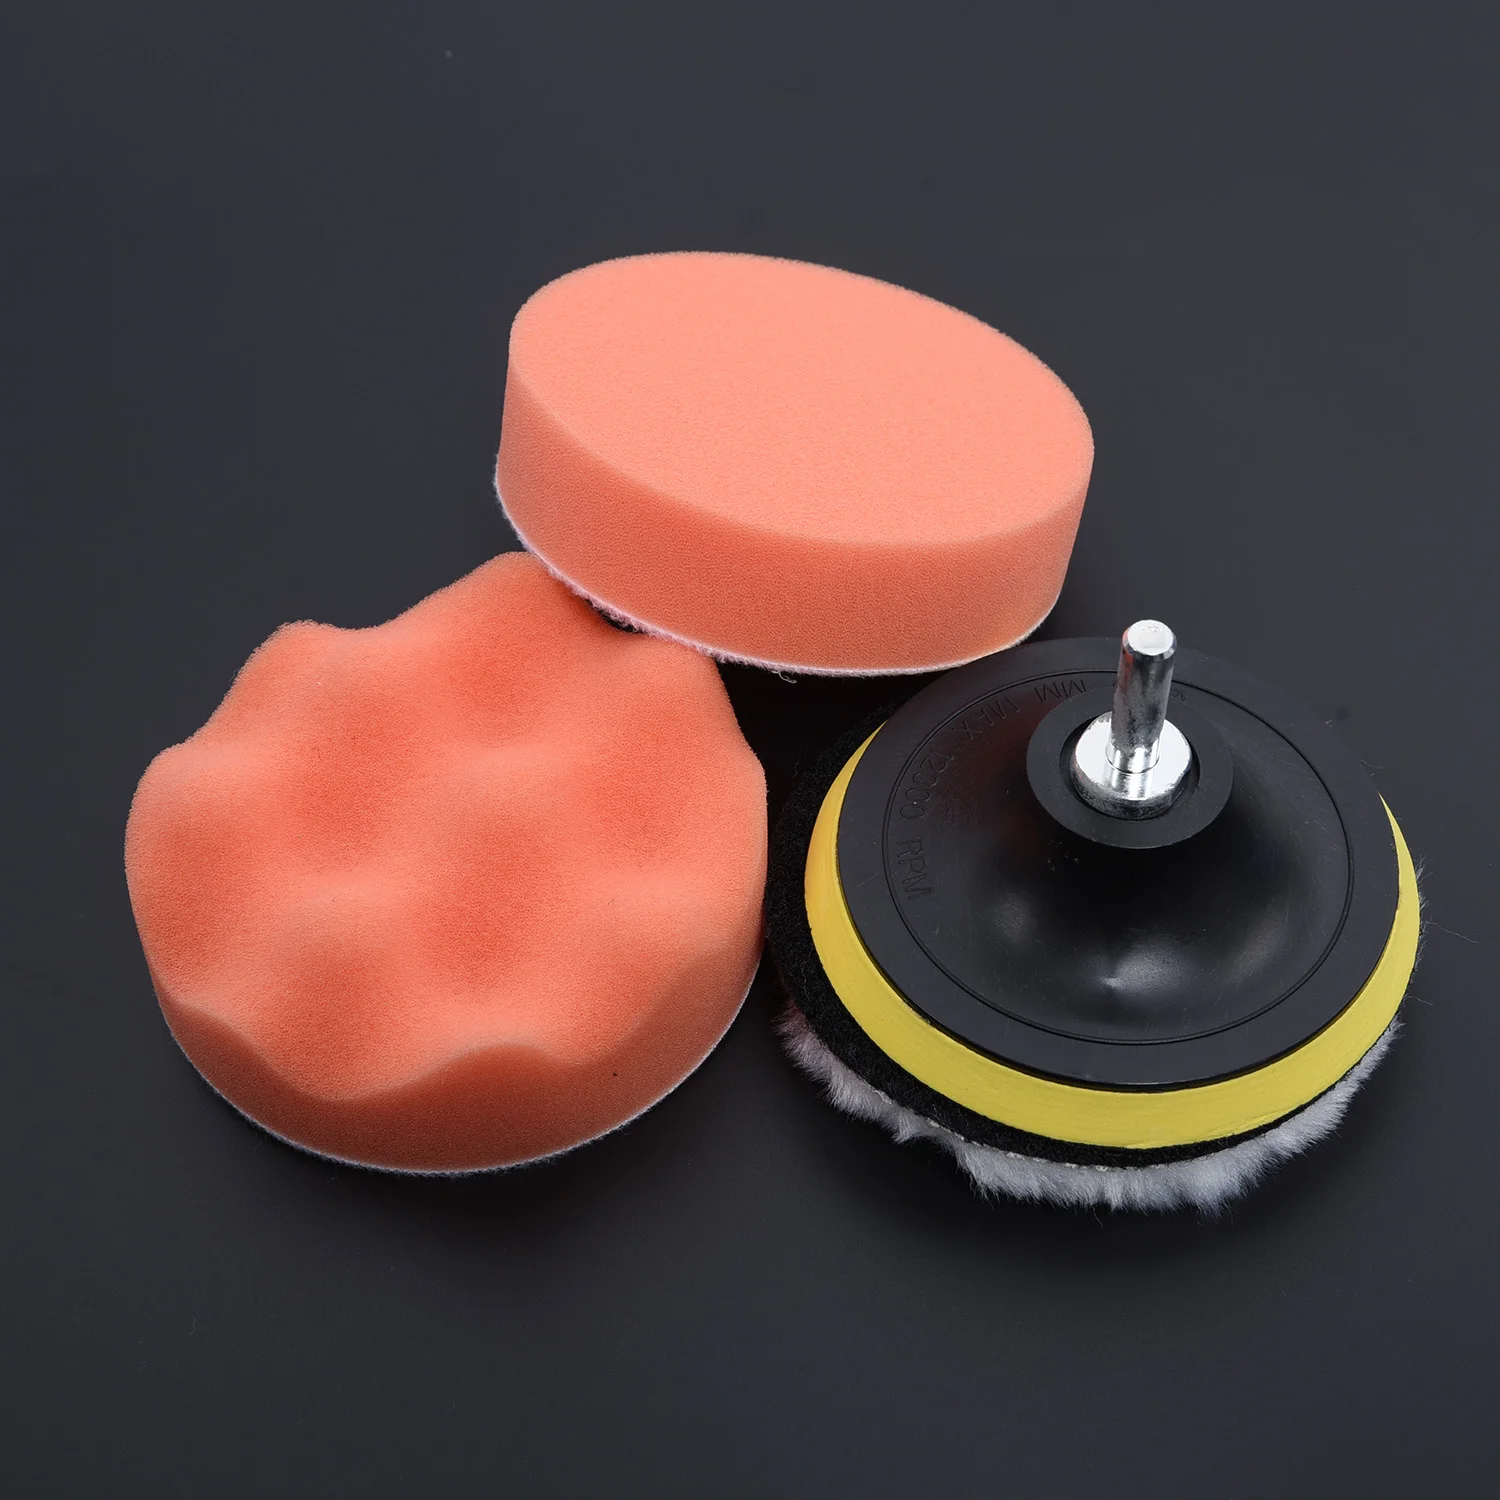 Pad Sponge Adapter Car Polishing Kit Cleaning Compound Foam Auto Buffing Polisher Drill Sander Washing Waxing Tools car round waxing polish sponges high density foam applicator pads curing polishing sponges motorcycle detailing wash tools